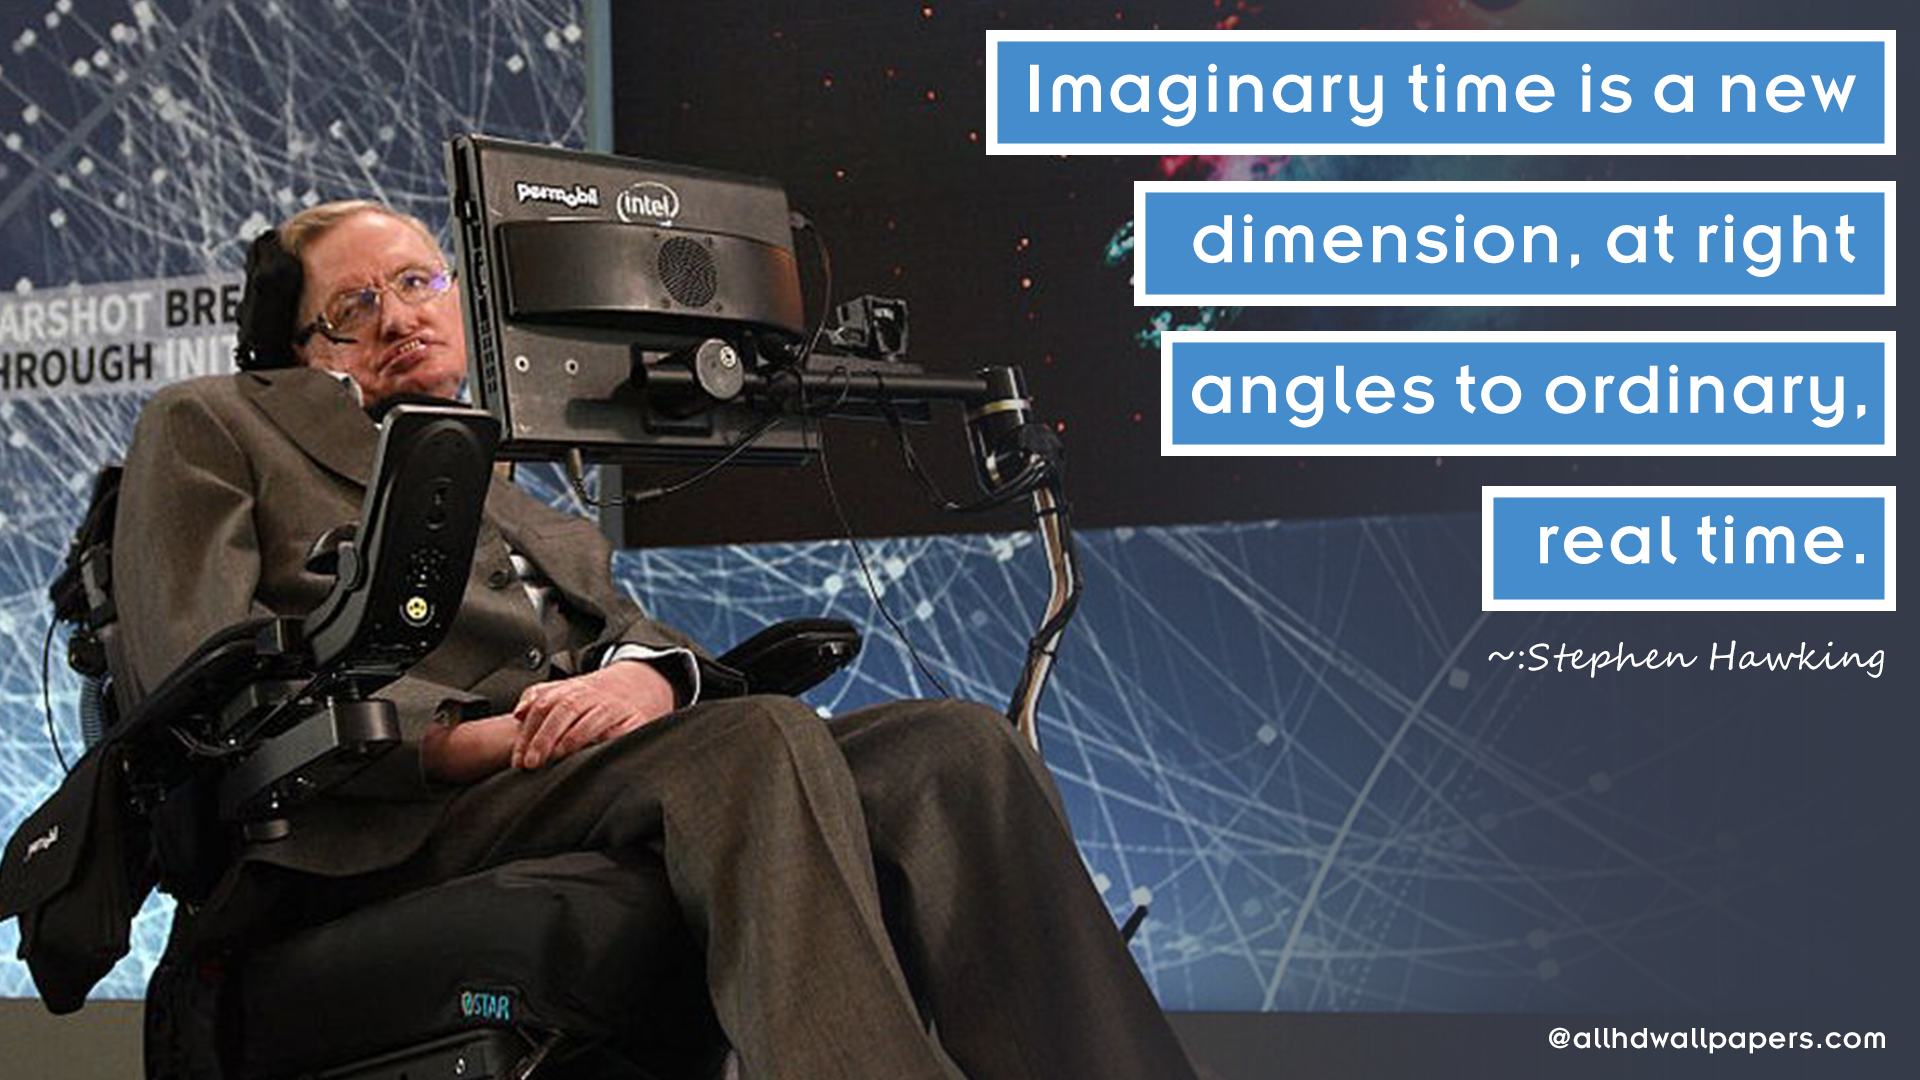 Stephen Hawking Quote Wallpaper5 - Scientist Who Died Recently - 1920x1080  Wallpaper 